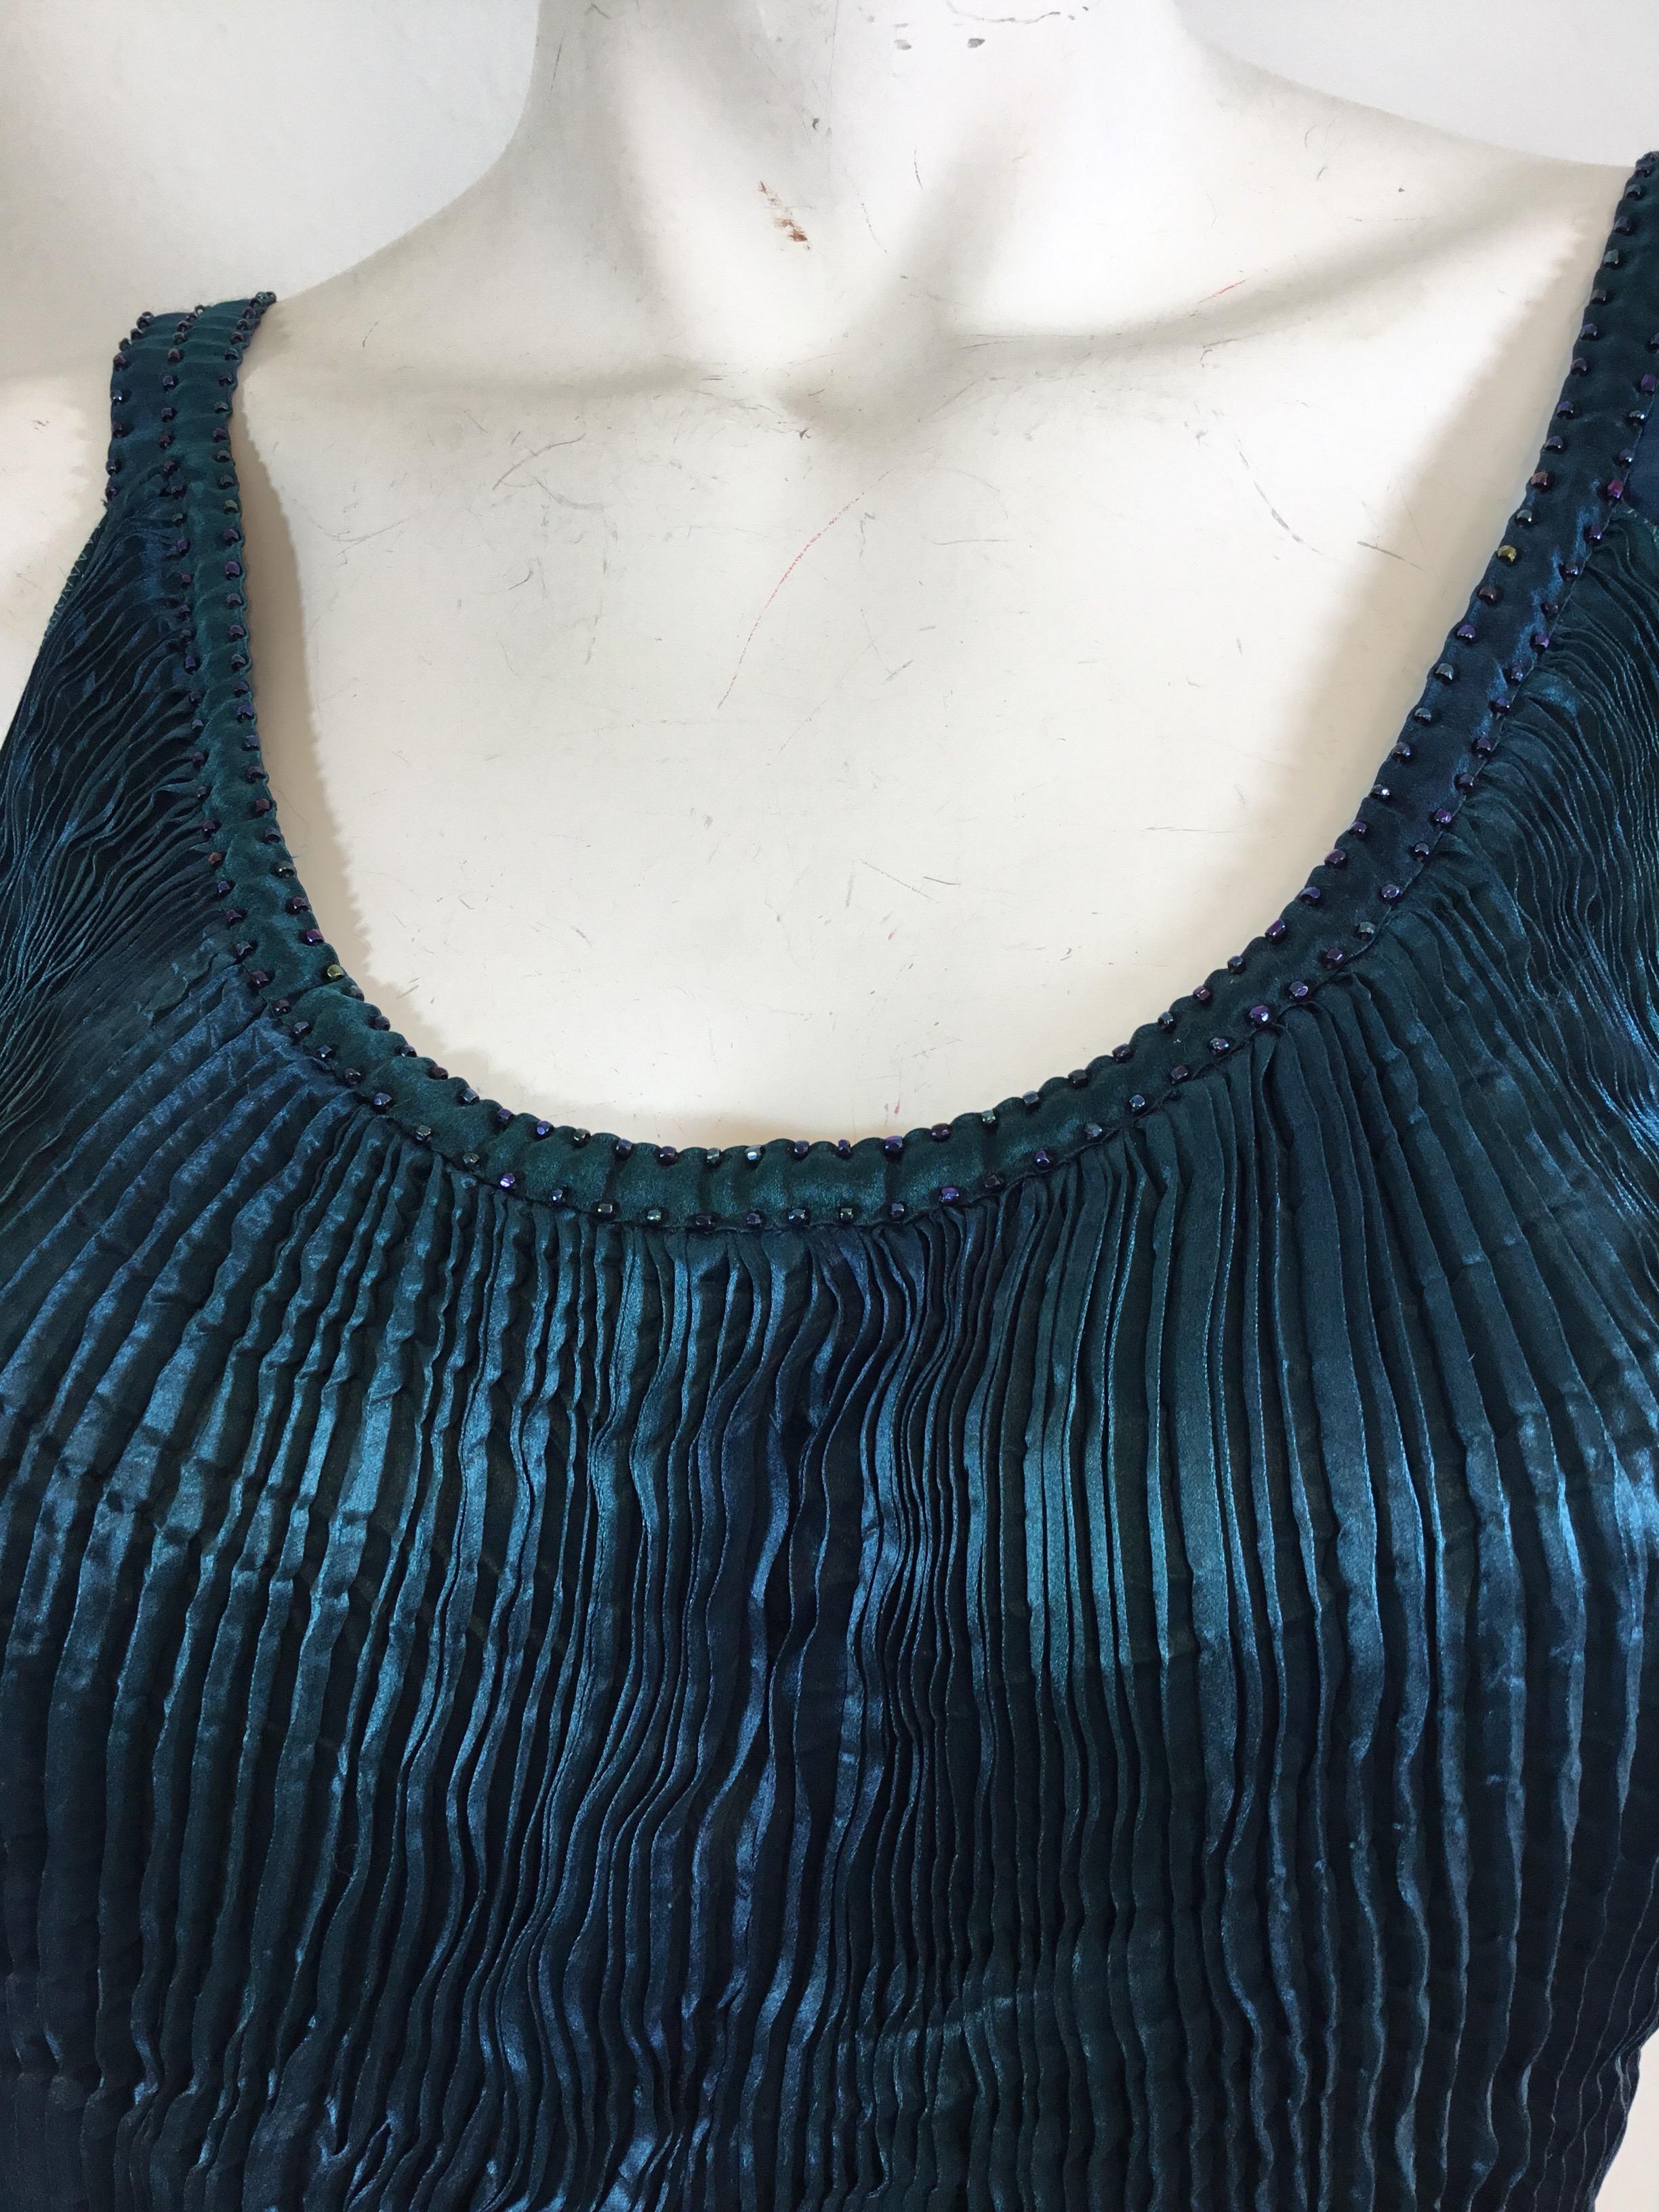 Beautiful Charles Patricia Lester top with bead detailing along the neckline, pleated silk throughout and a frilled hem. 100% silk. 

Bust 30” (with room for expansion due to pleated design), length 18” 